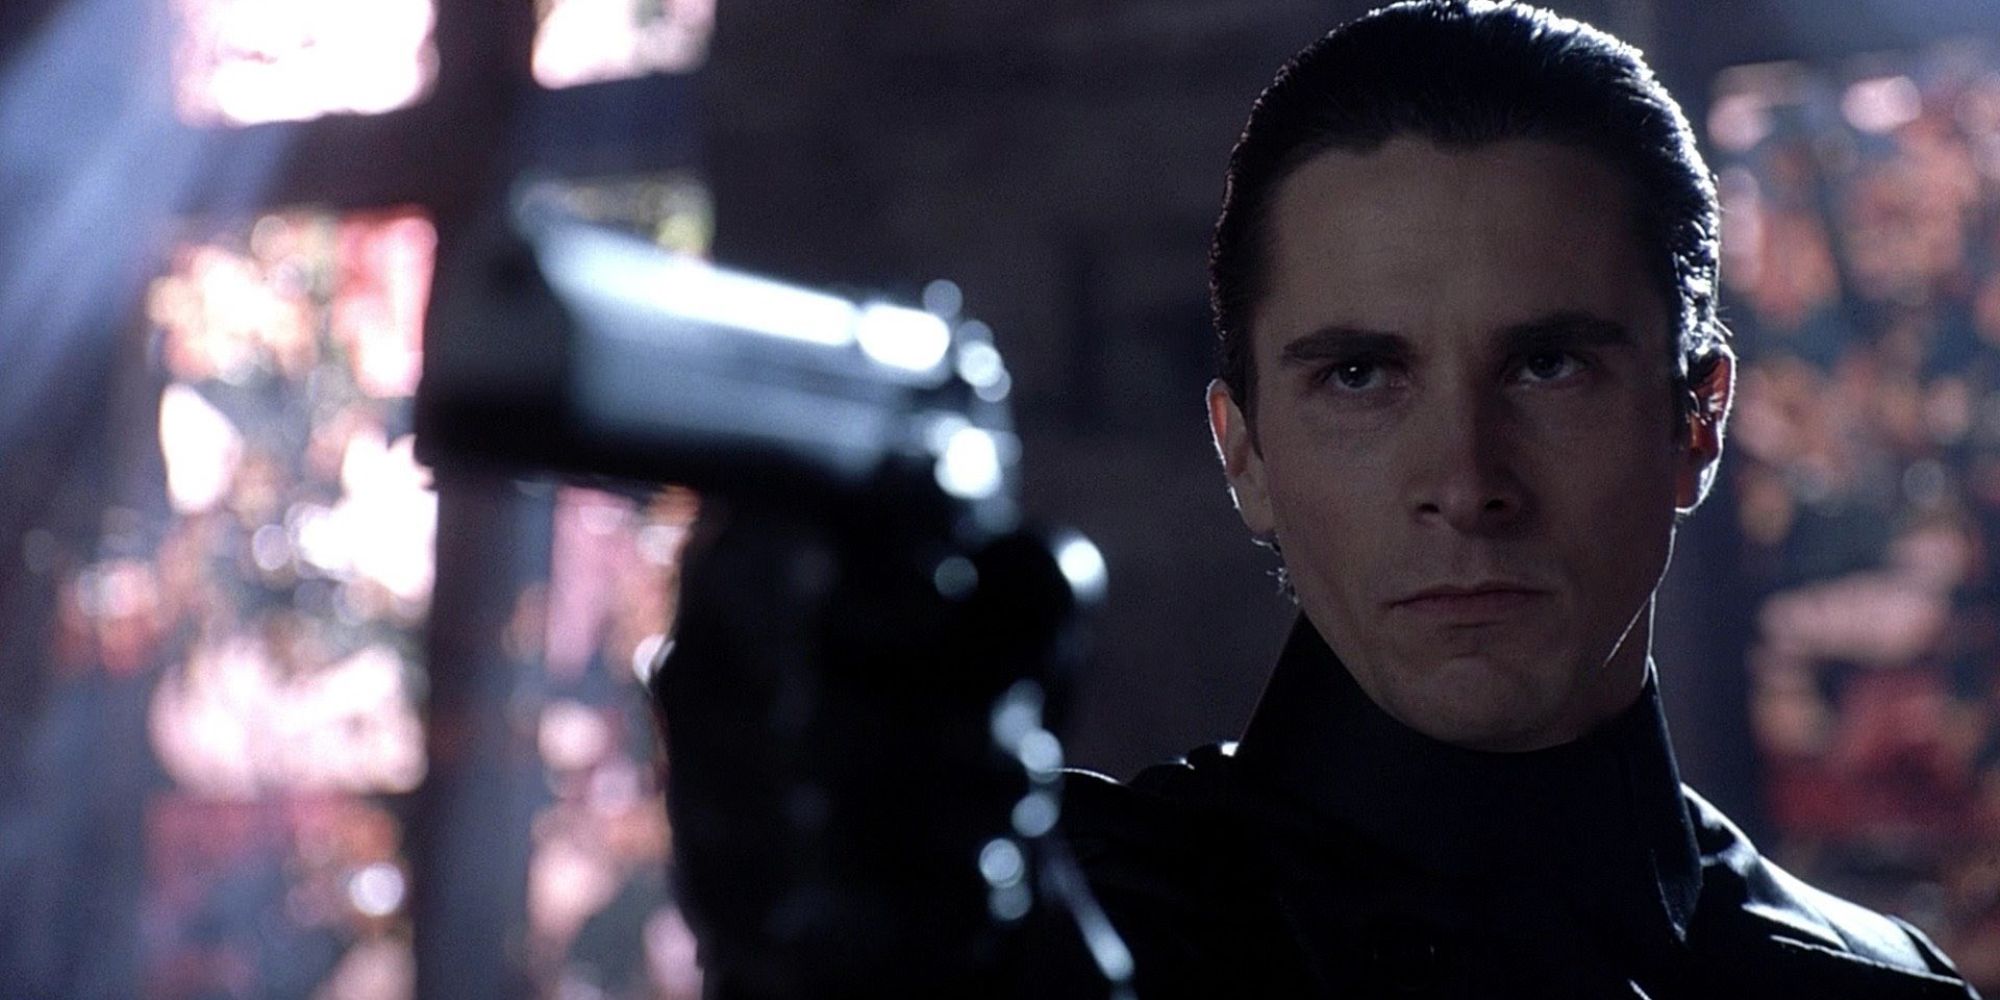 Christian Bale in Equilibrium